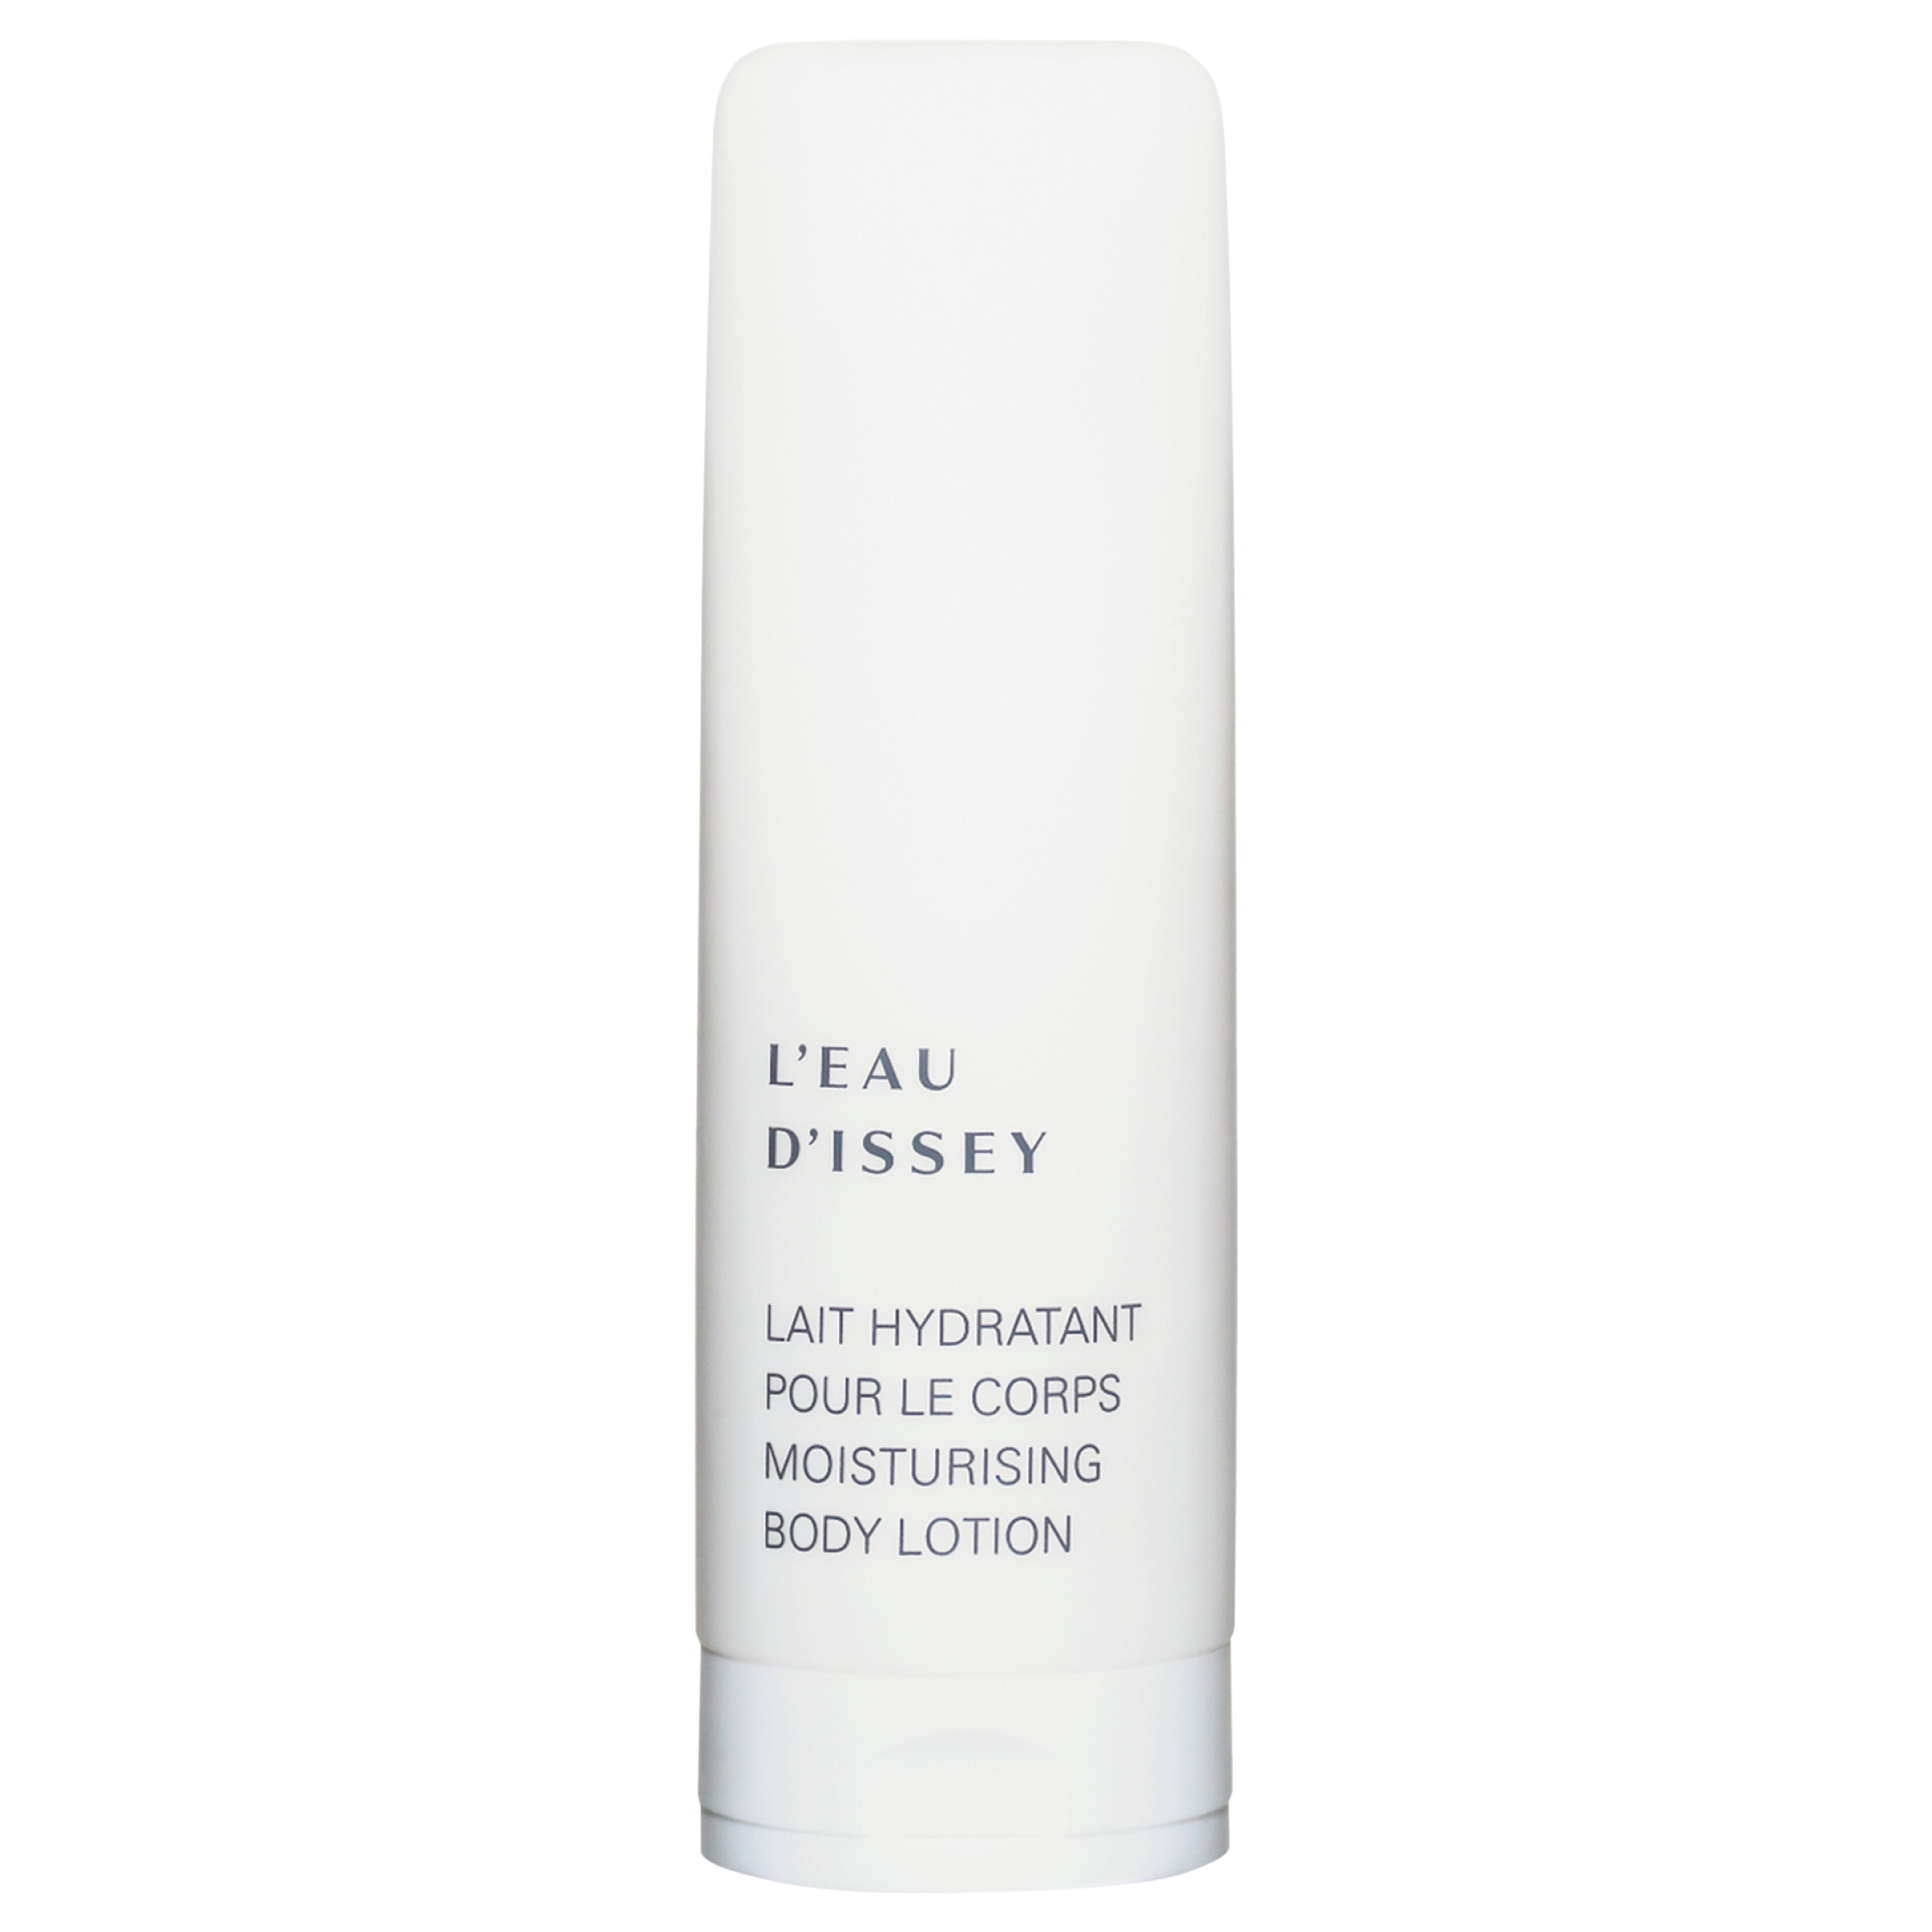 Issey Miyake L'eau D'issey Body Lotion 1